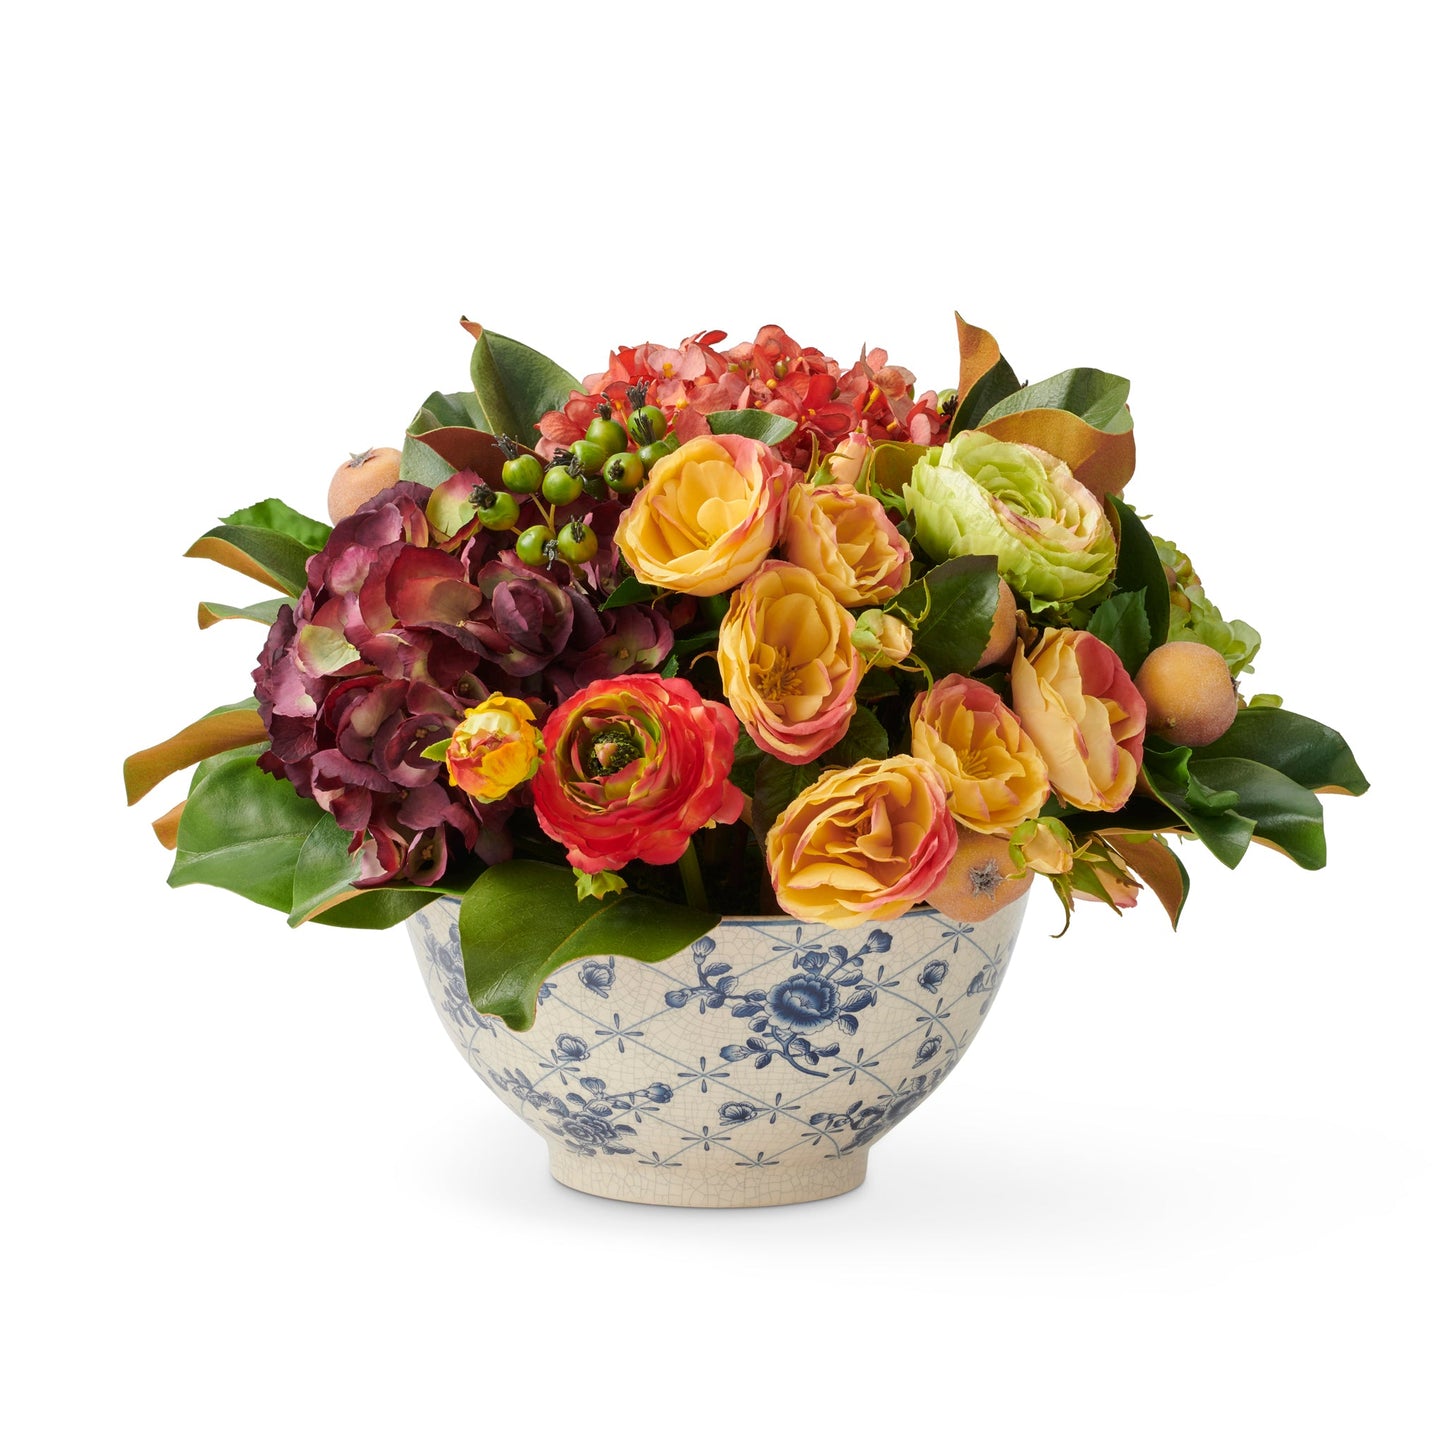 Mix Fall Floral in Trellis Bowl